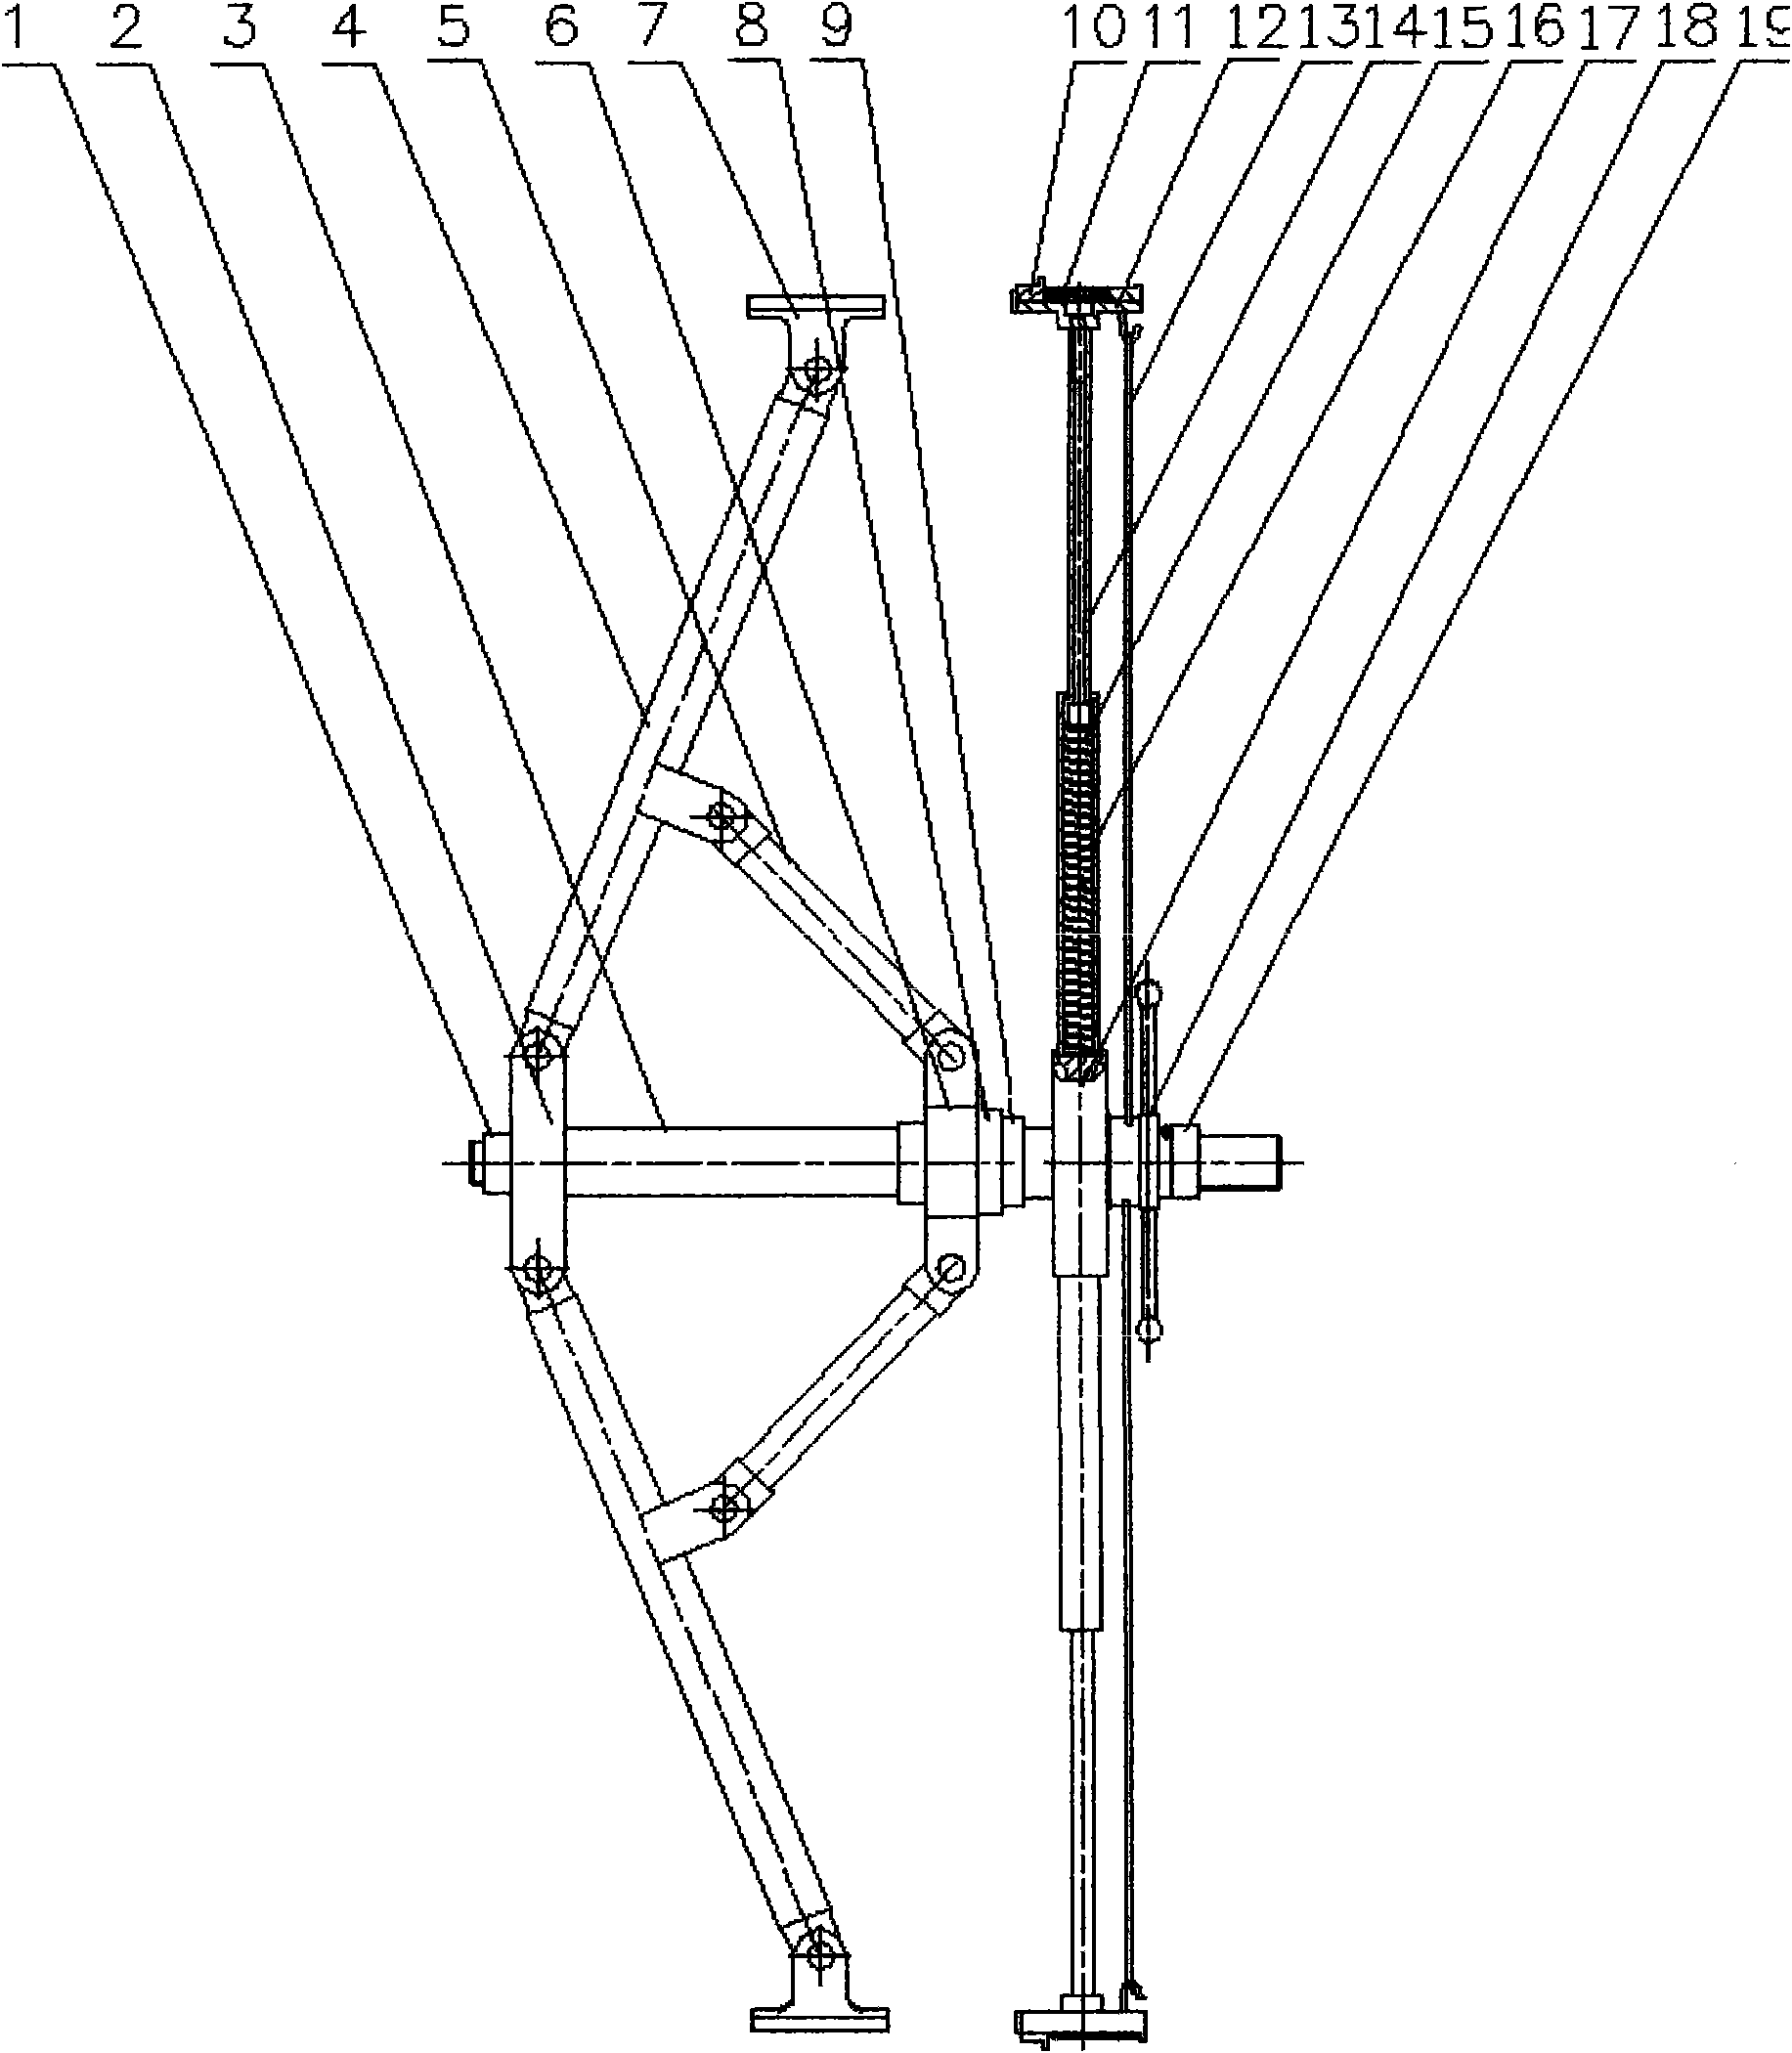 Measuring tool for diameter of adjustable convergence spout